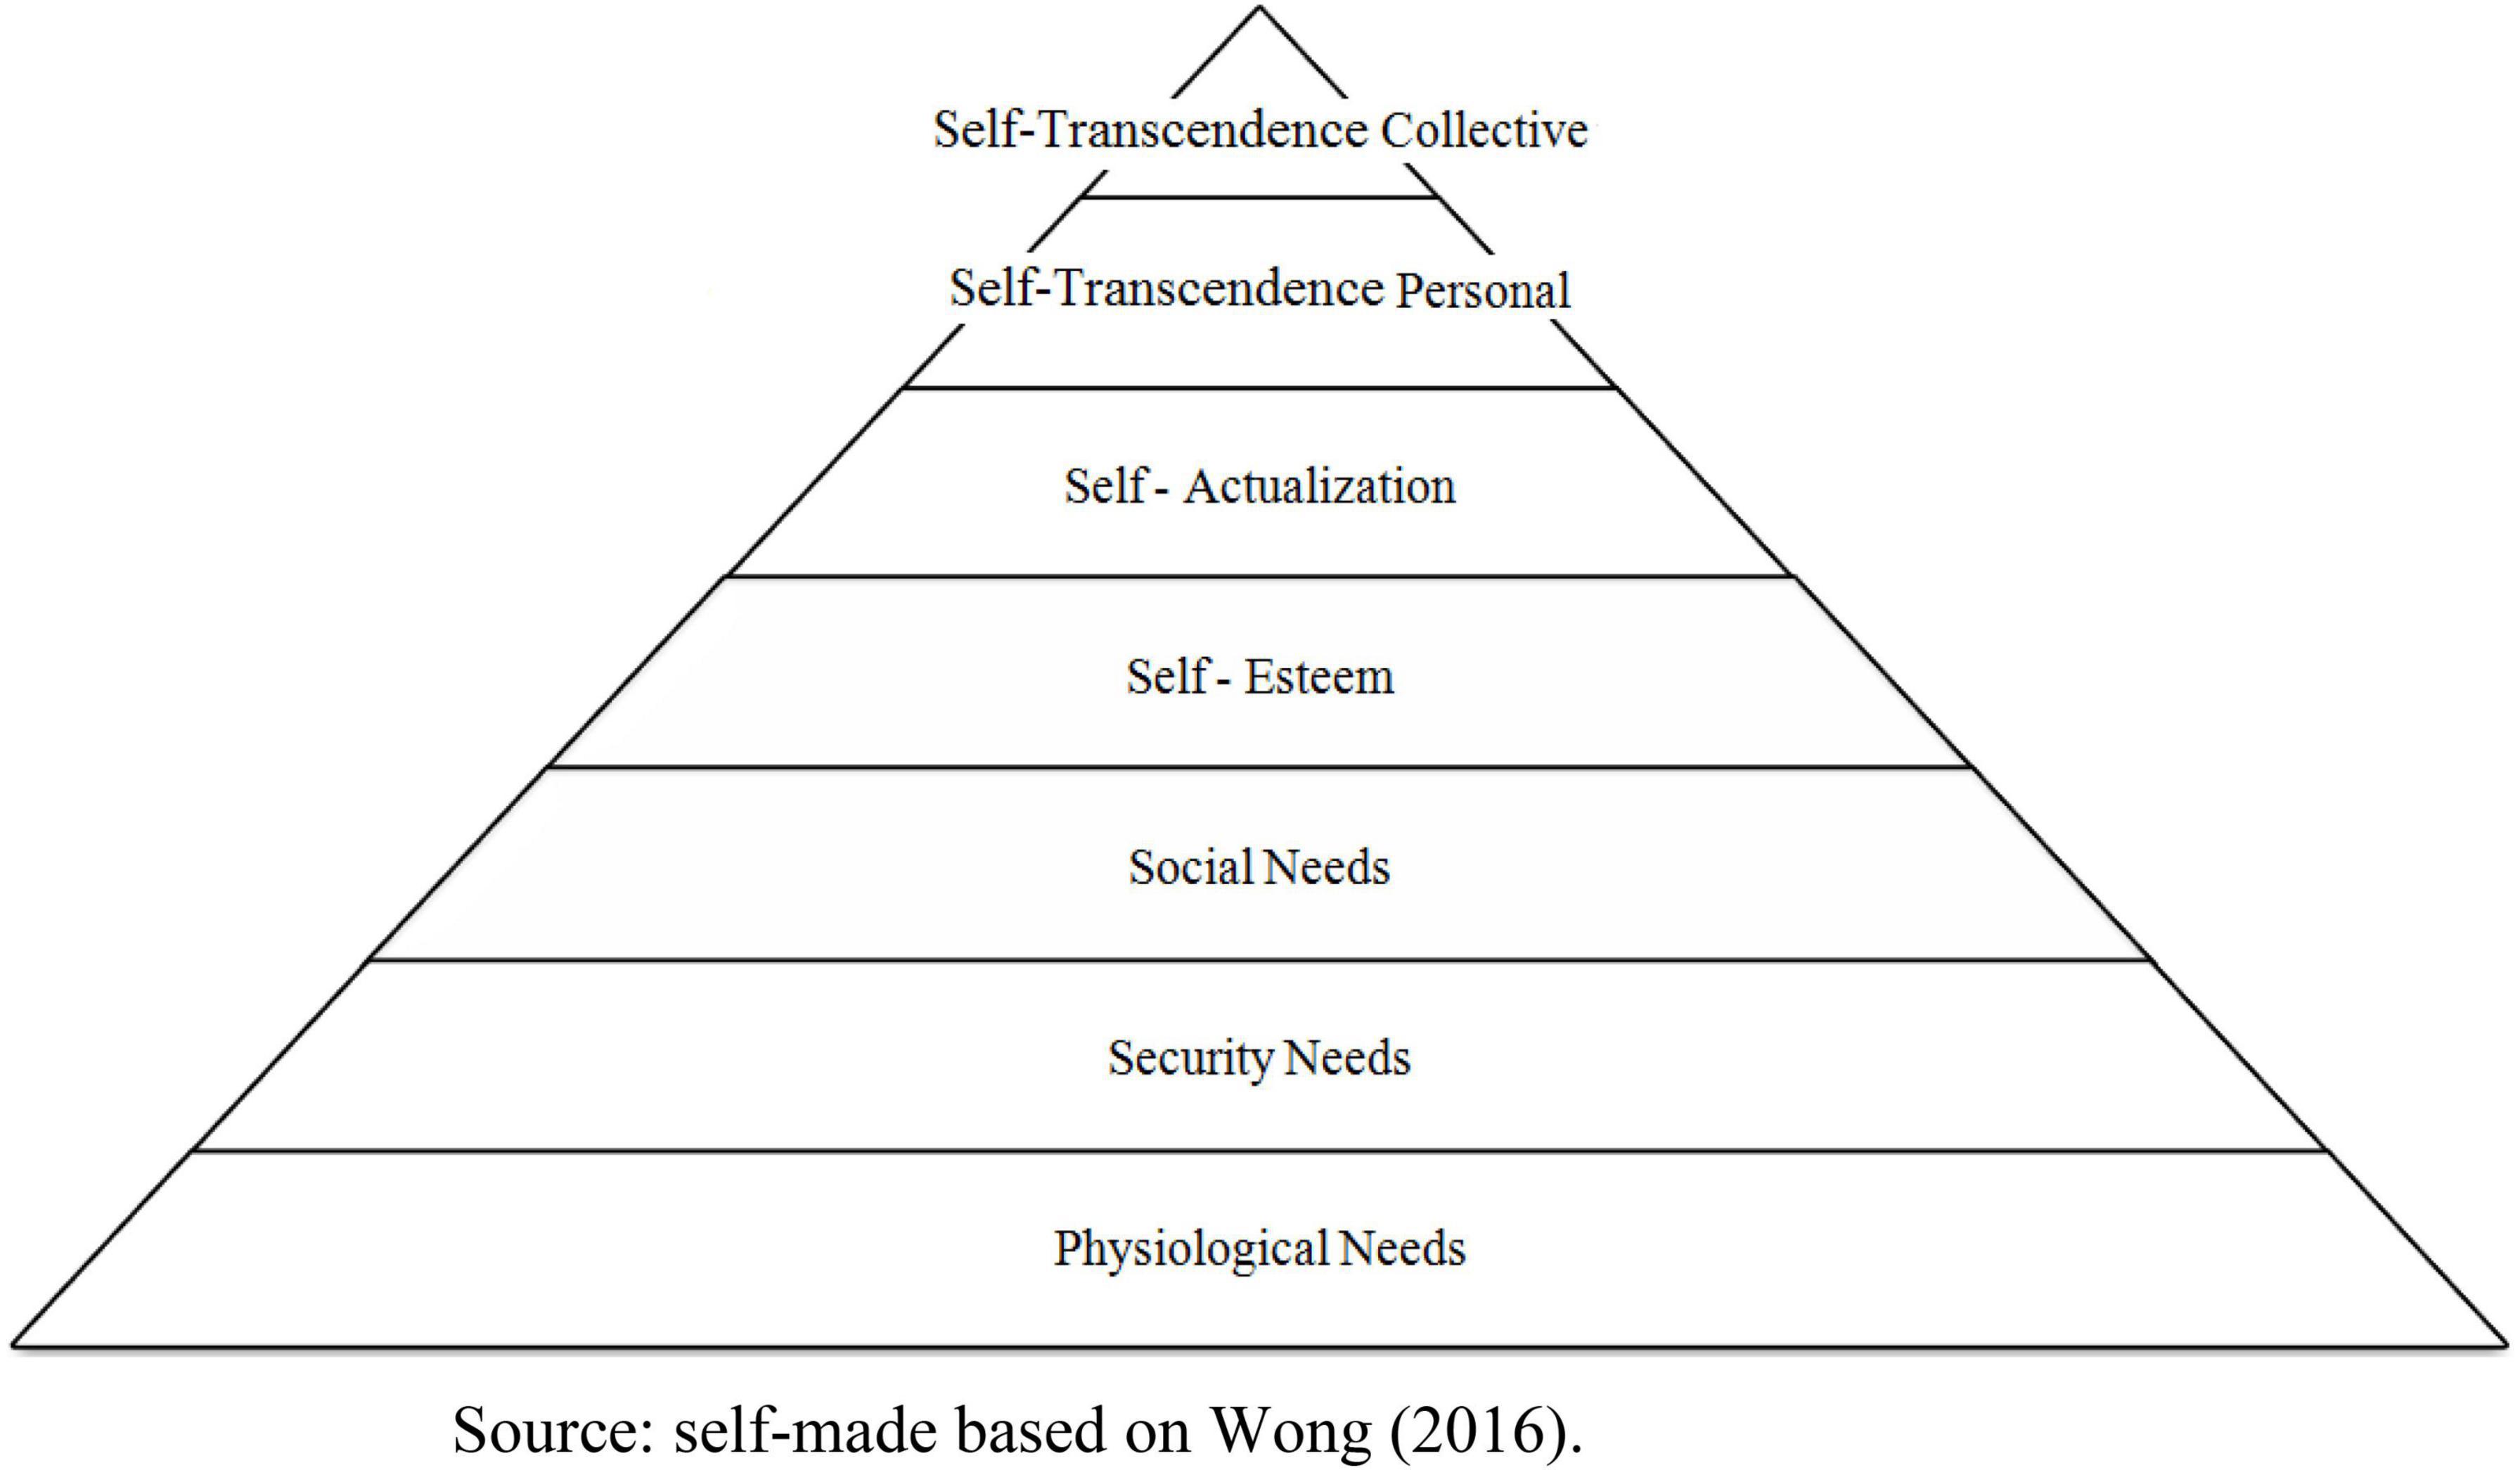 Full article: On Being (Social), Selfhood and the Creative